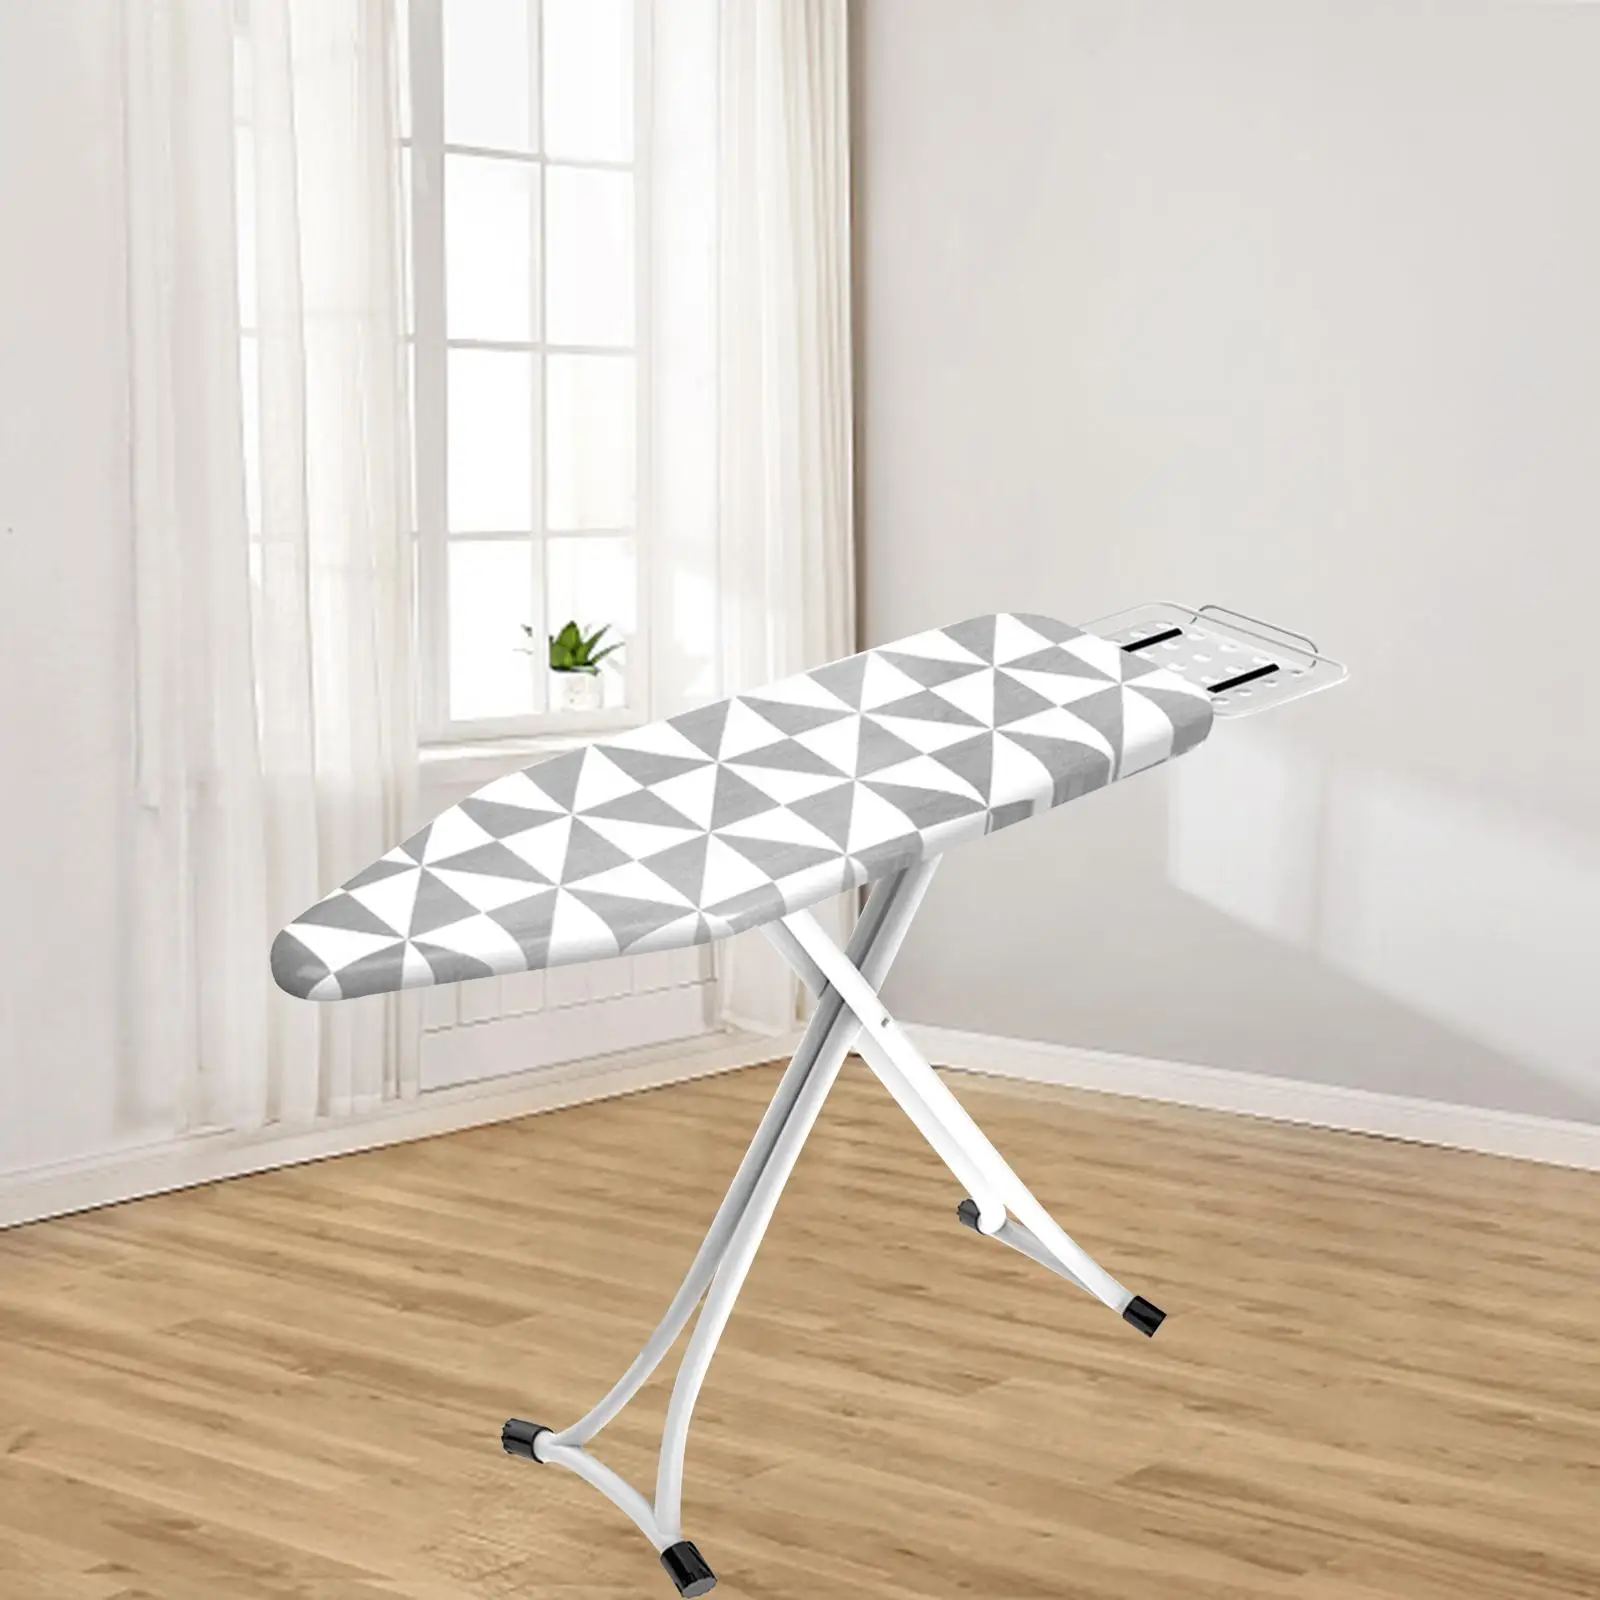 Ironing Board Padded Cover Heat Insulation Ironing Table Cover Protector Laundry Supplies